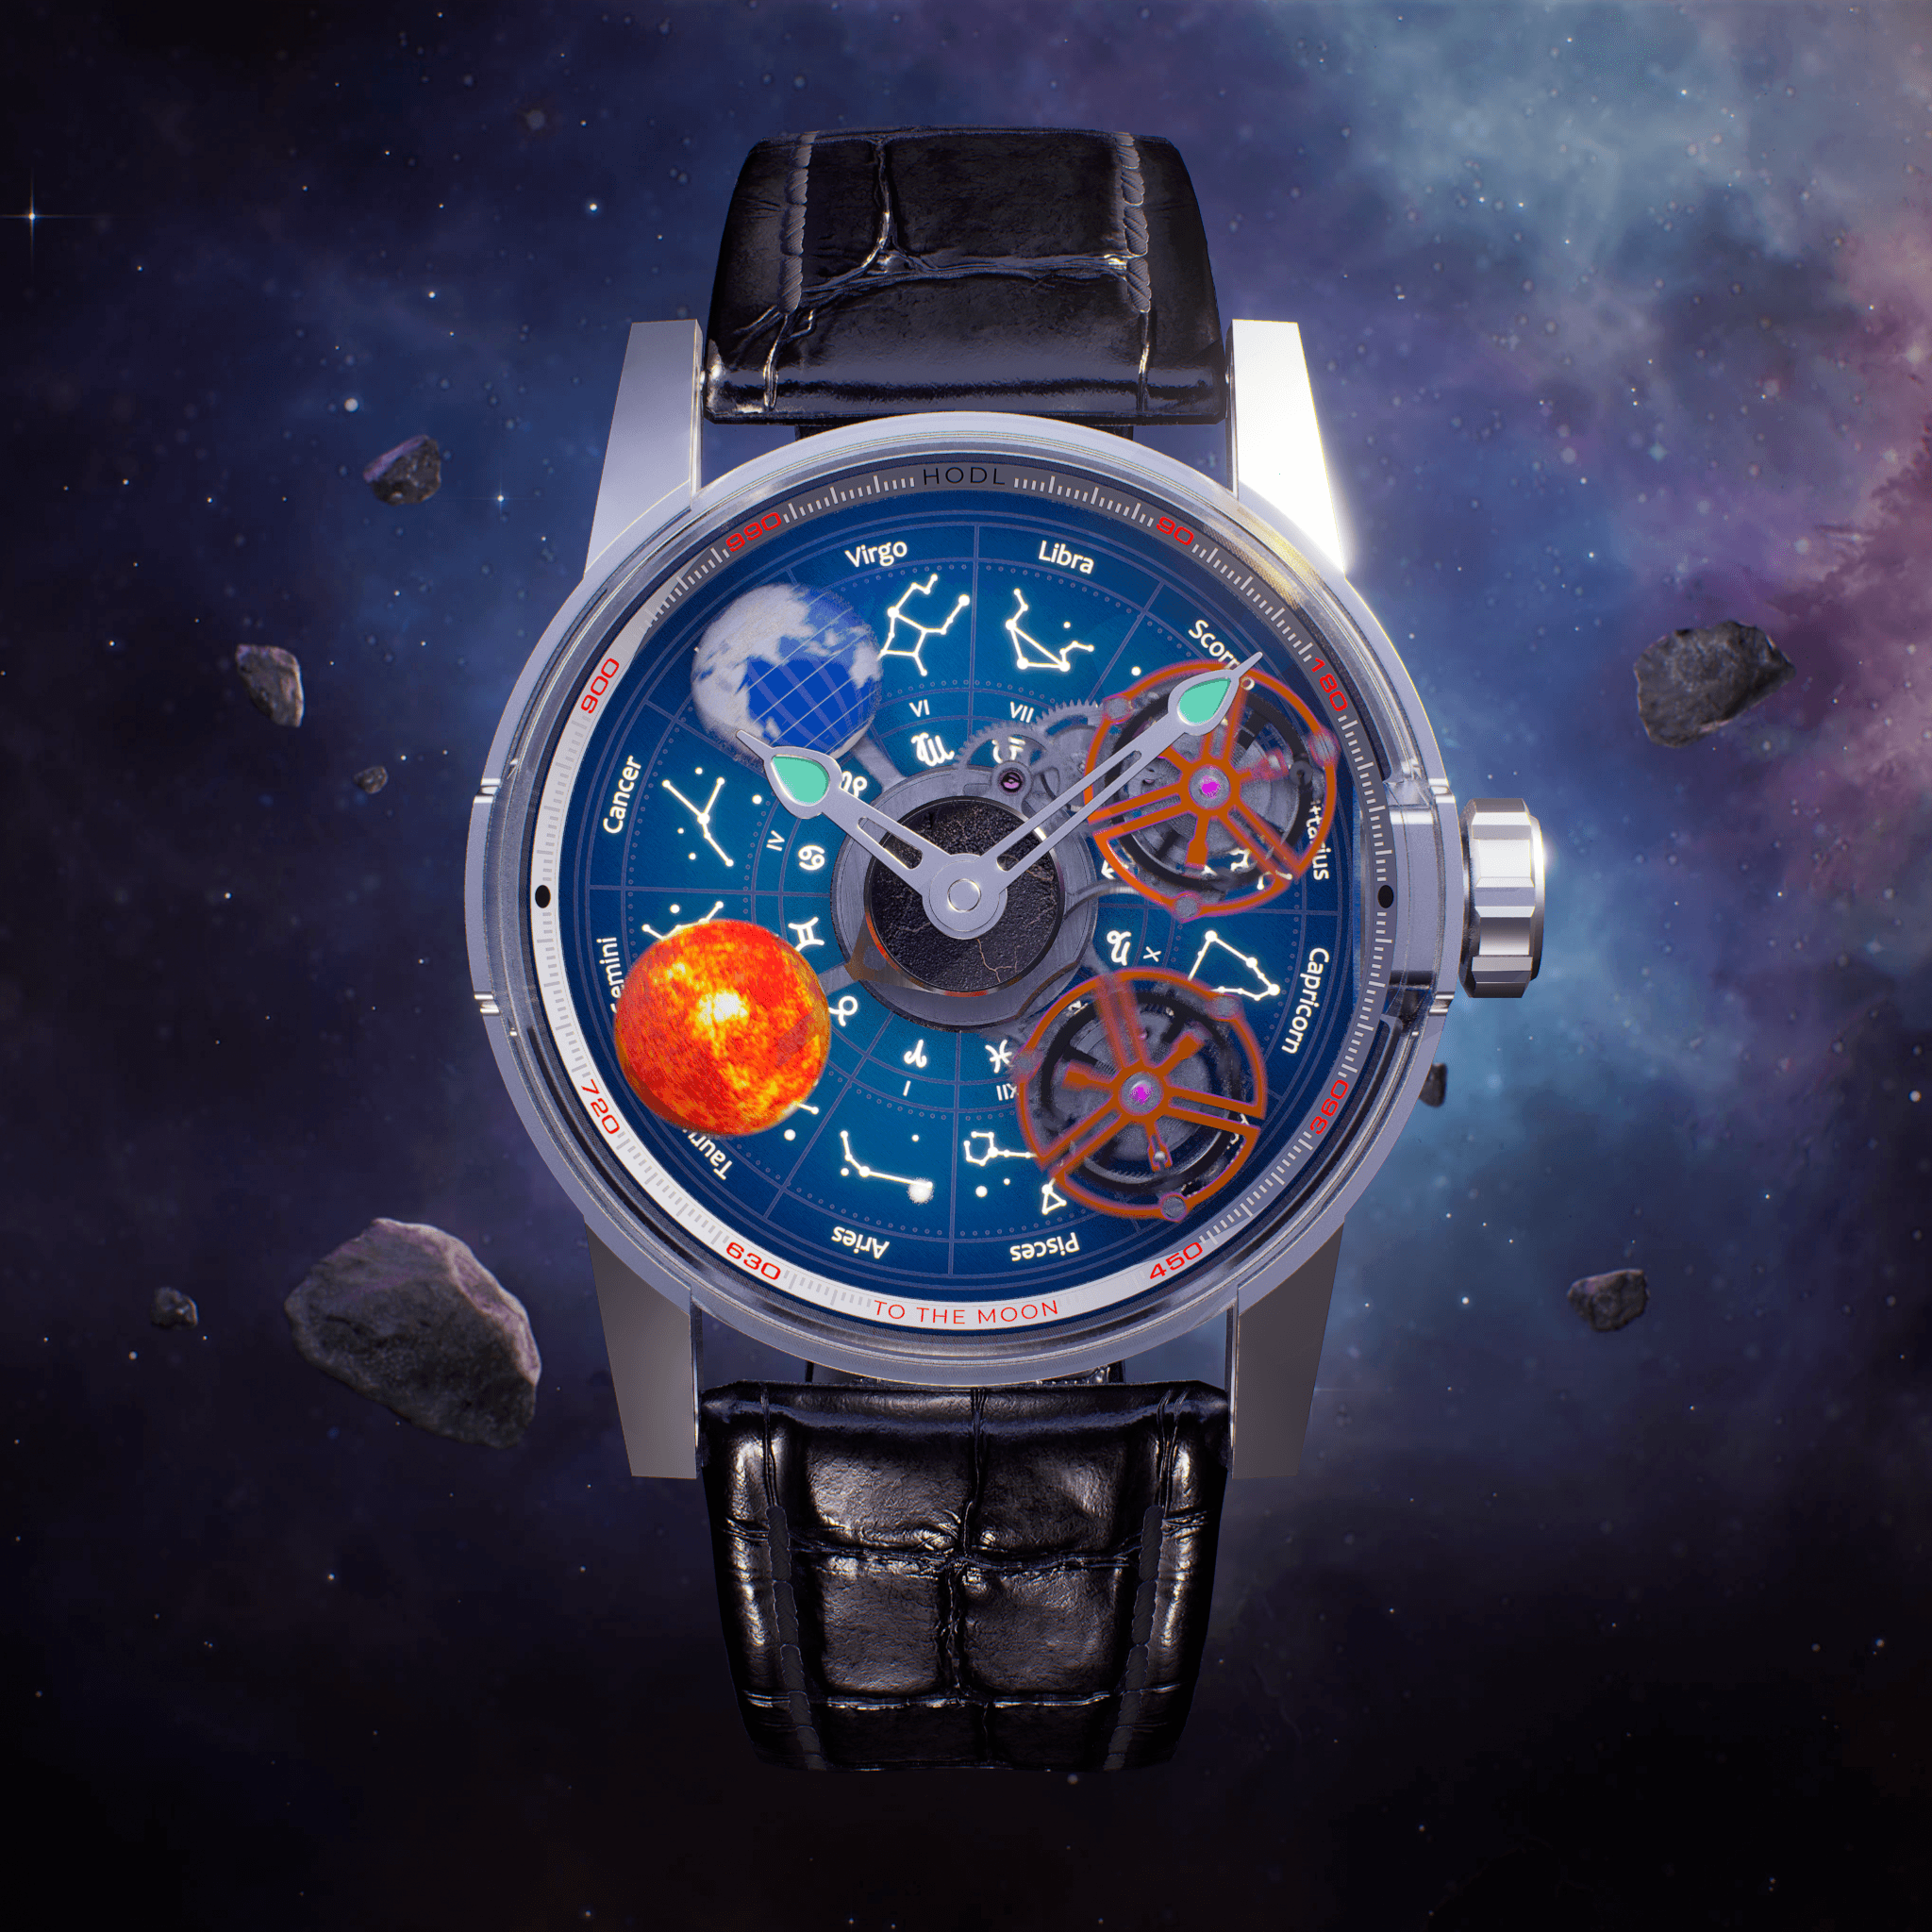 Hands-On: Louis Moinet Space Revolution Watch